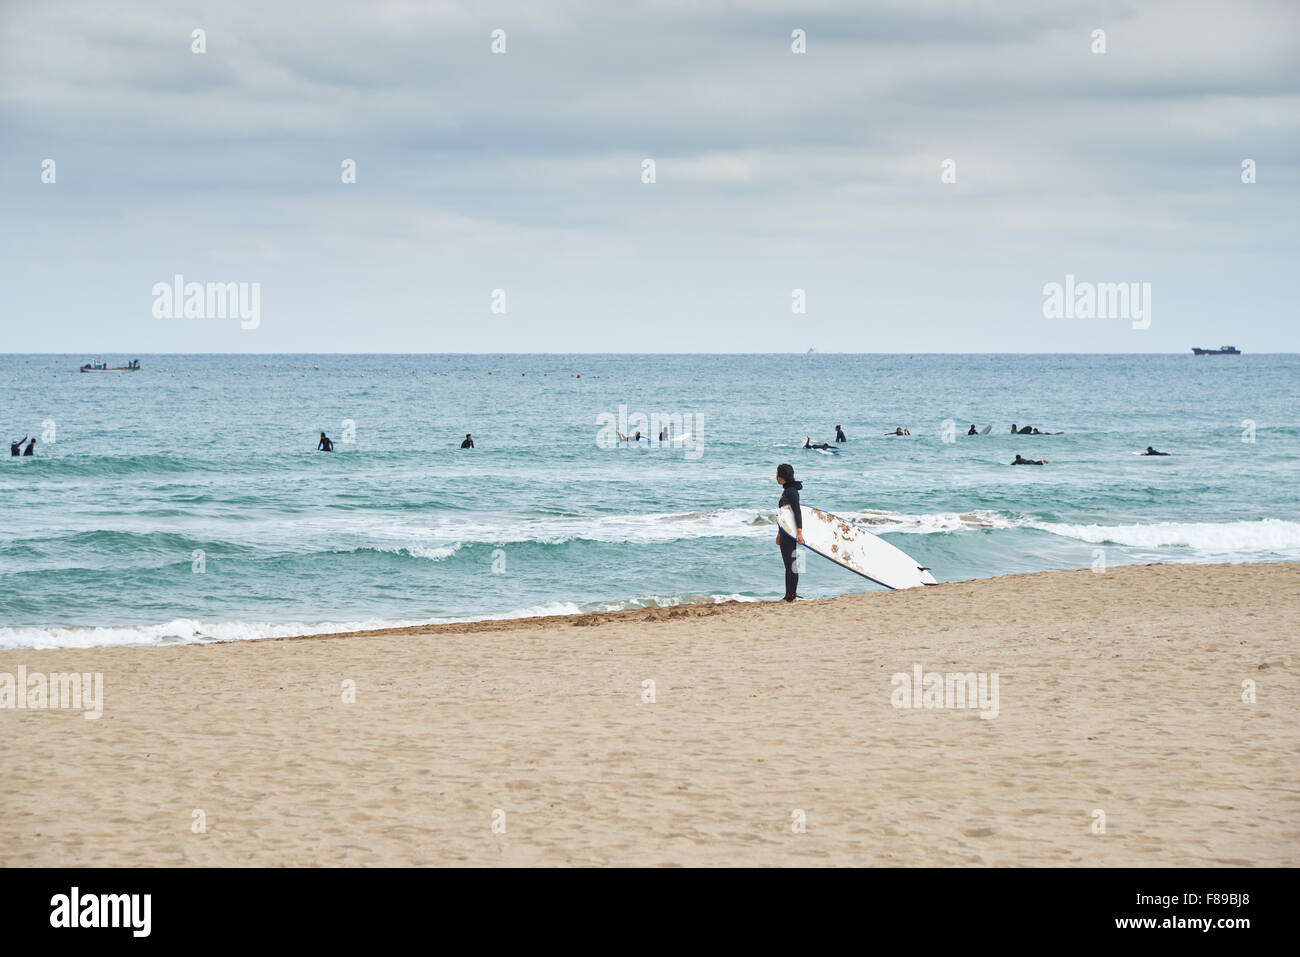 Landscape of Songjeong Beach with a woman holding surfing bard. The beach is located near the Haeundae beach in Busan and it has Stock Photo